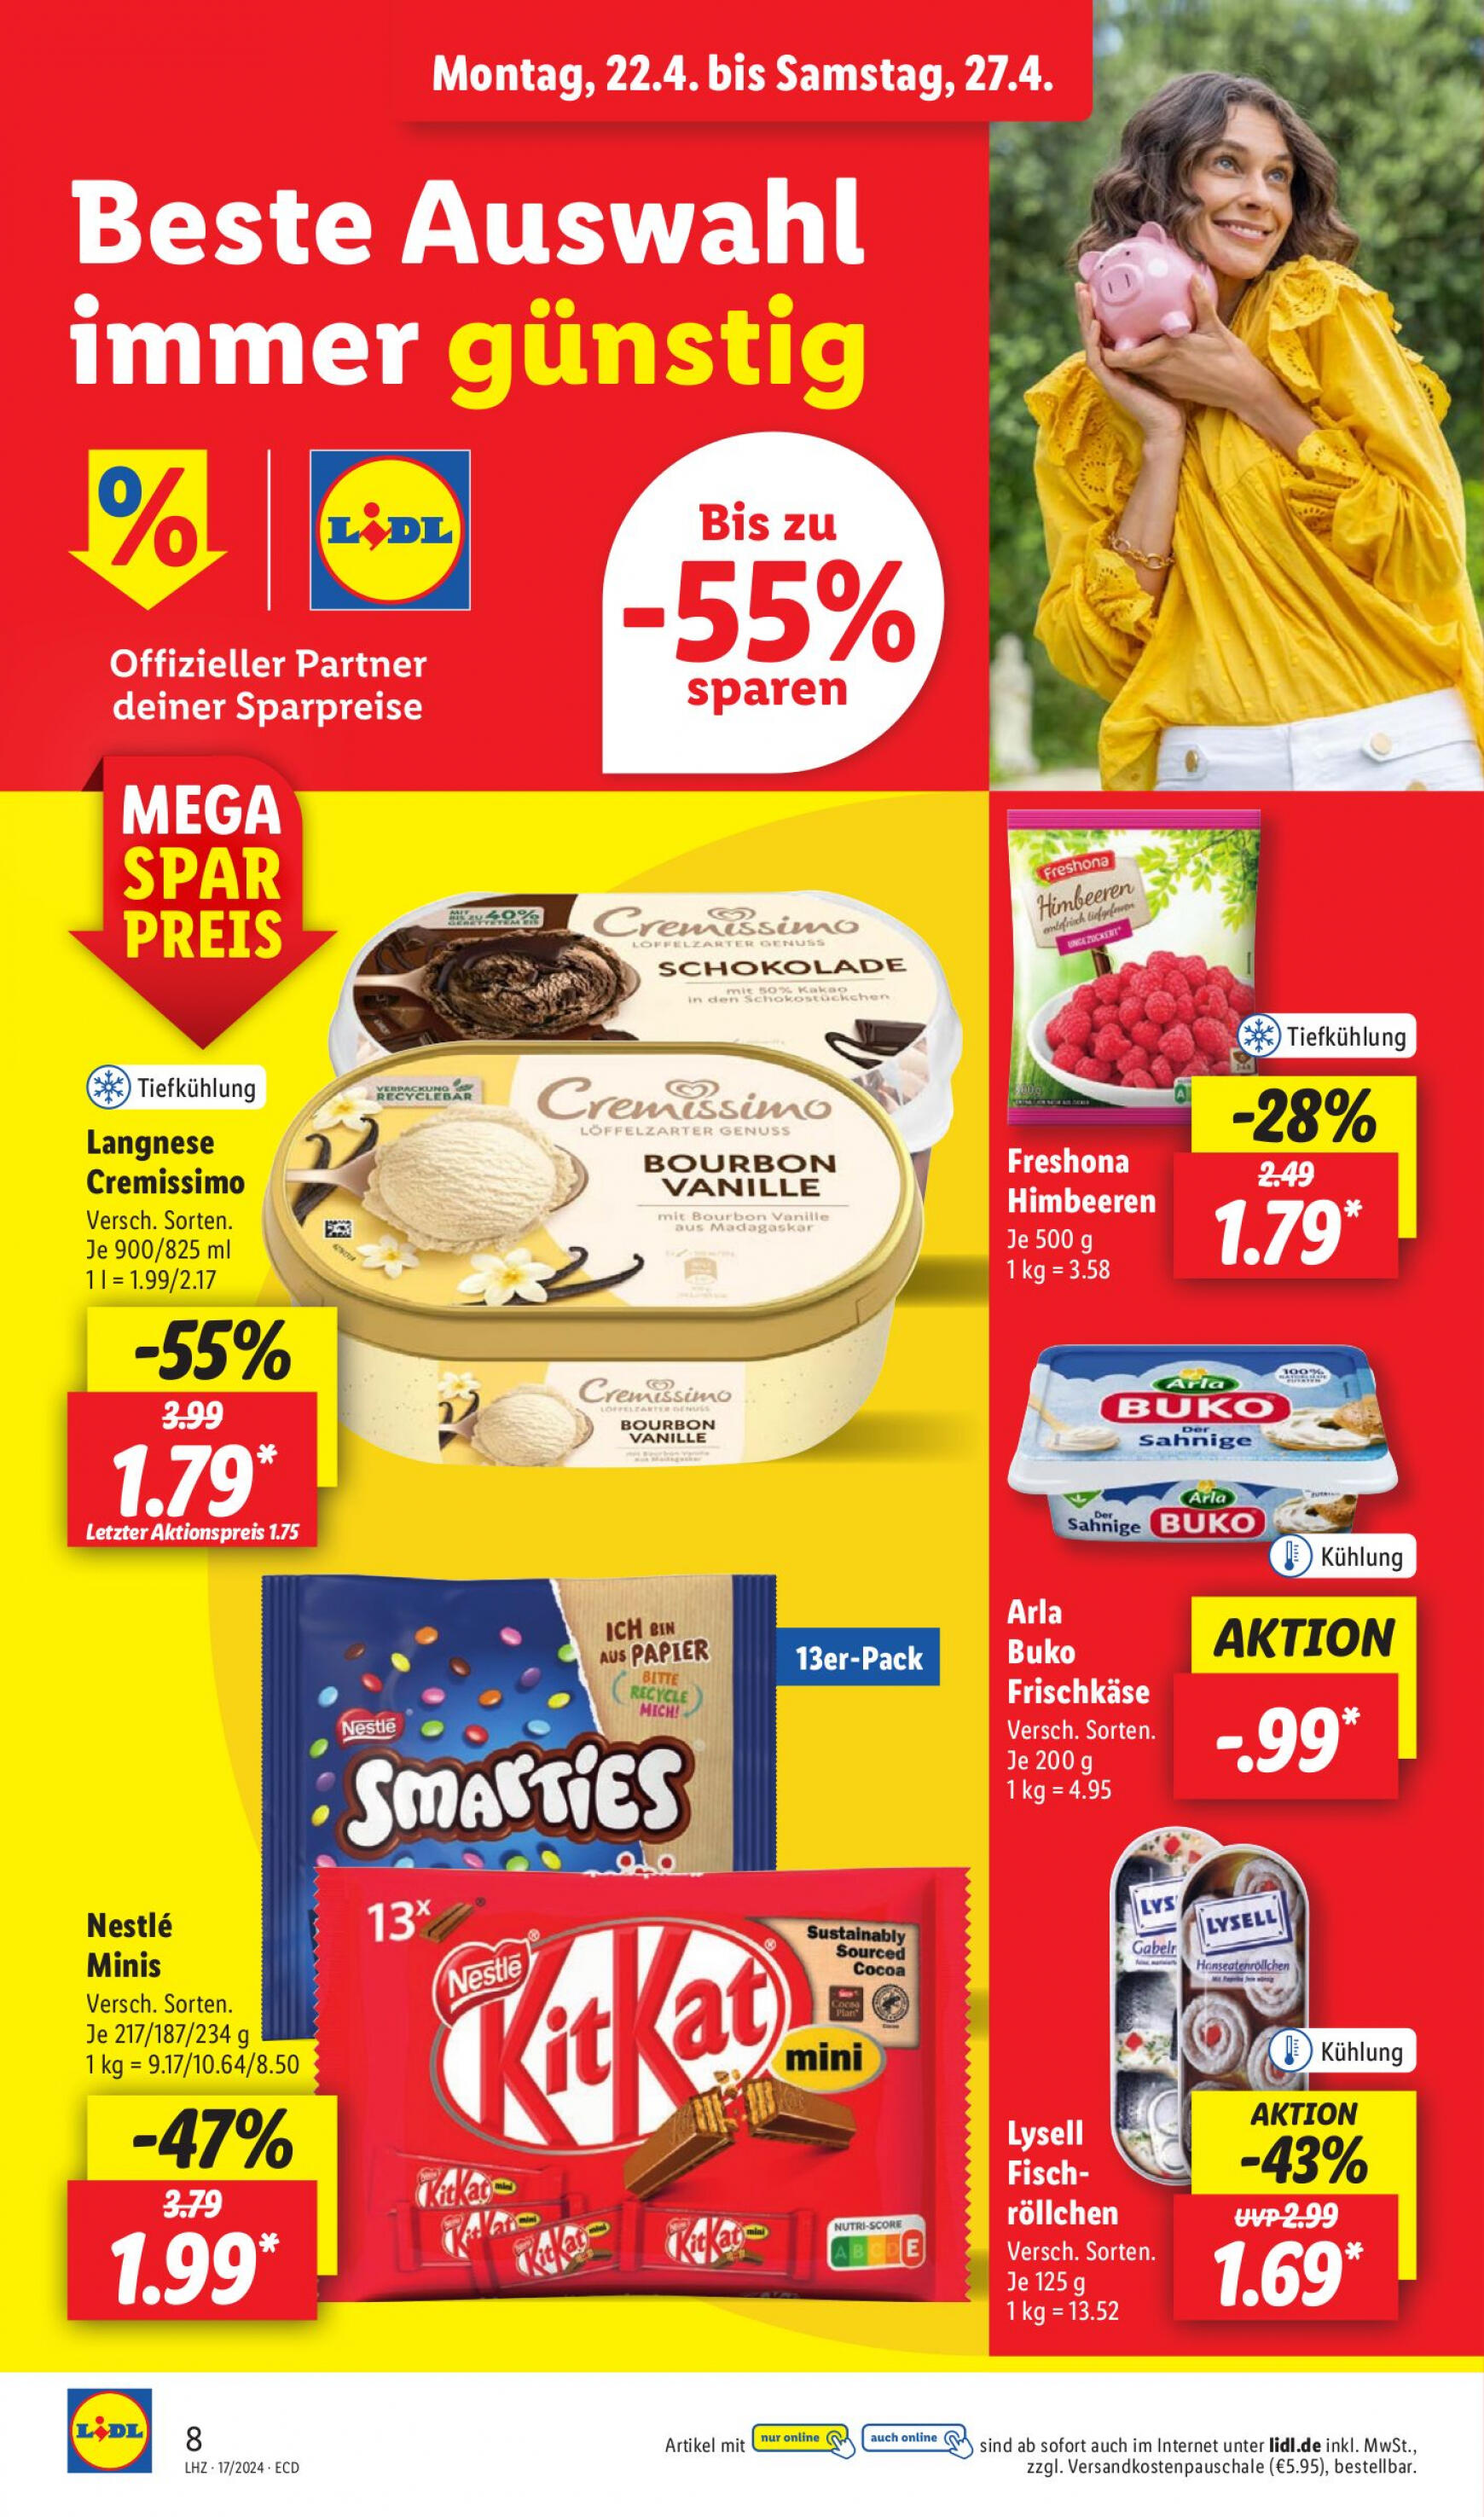 lidl - Flyer Lidl aktuell 22.04. - 27.04. - page: 14